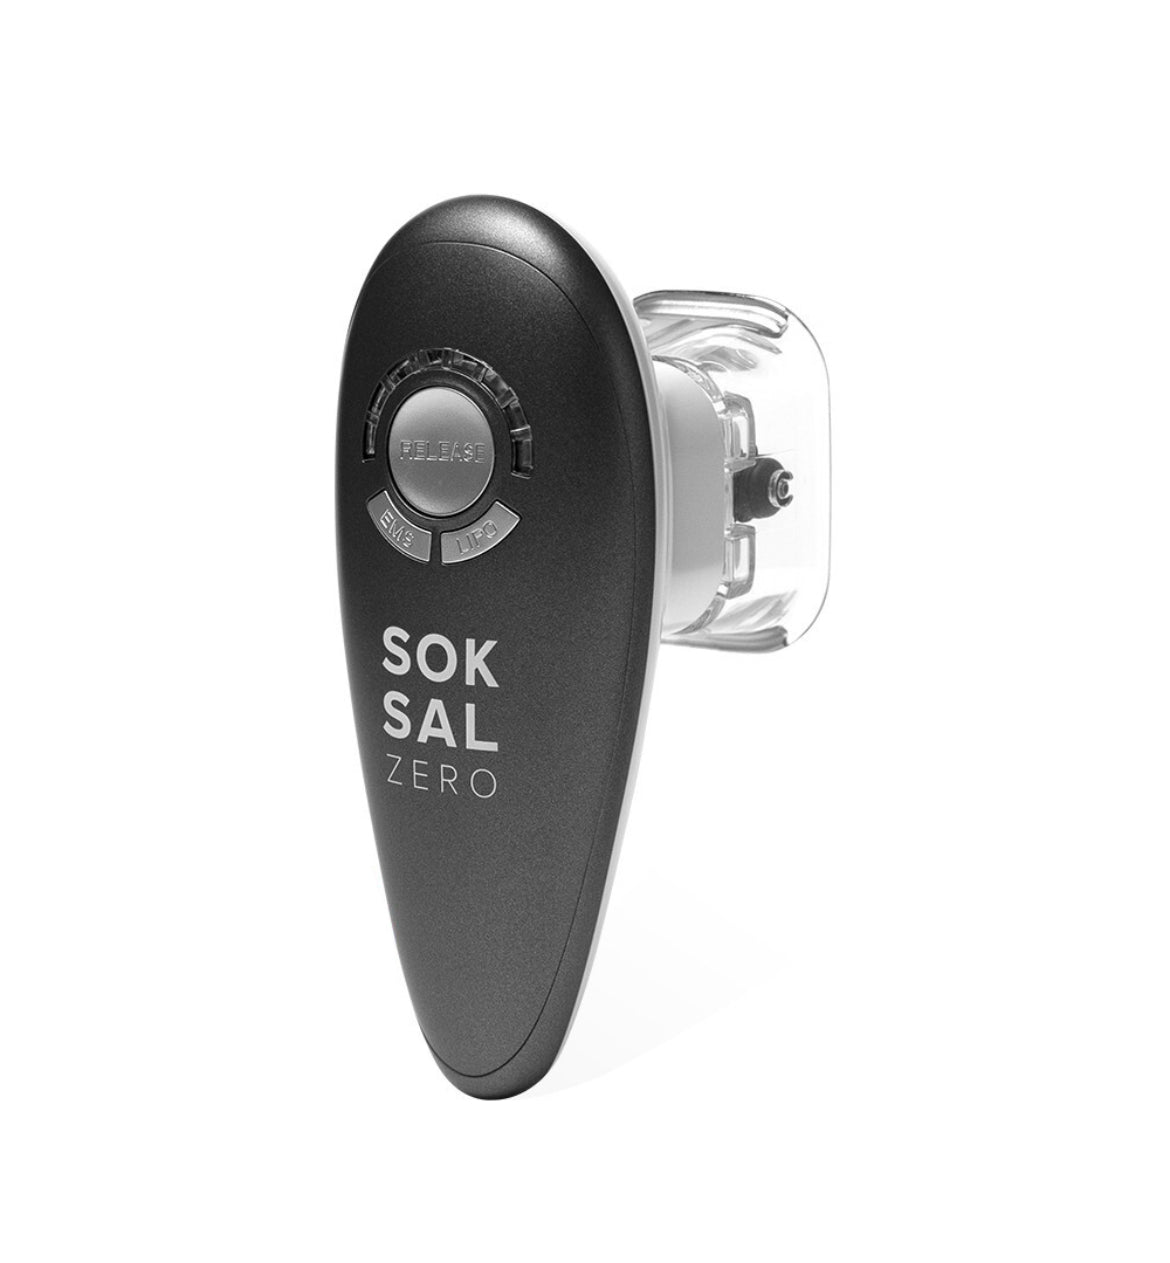 SOK SAL Zero Meditherapy skin massager, low frequency massager